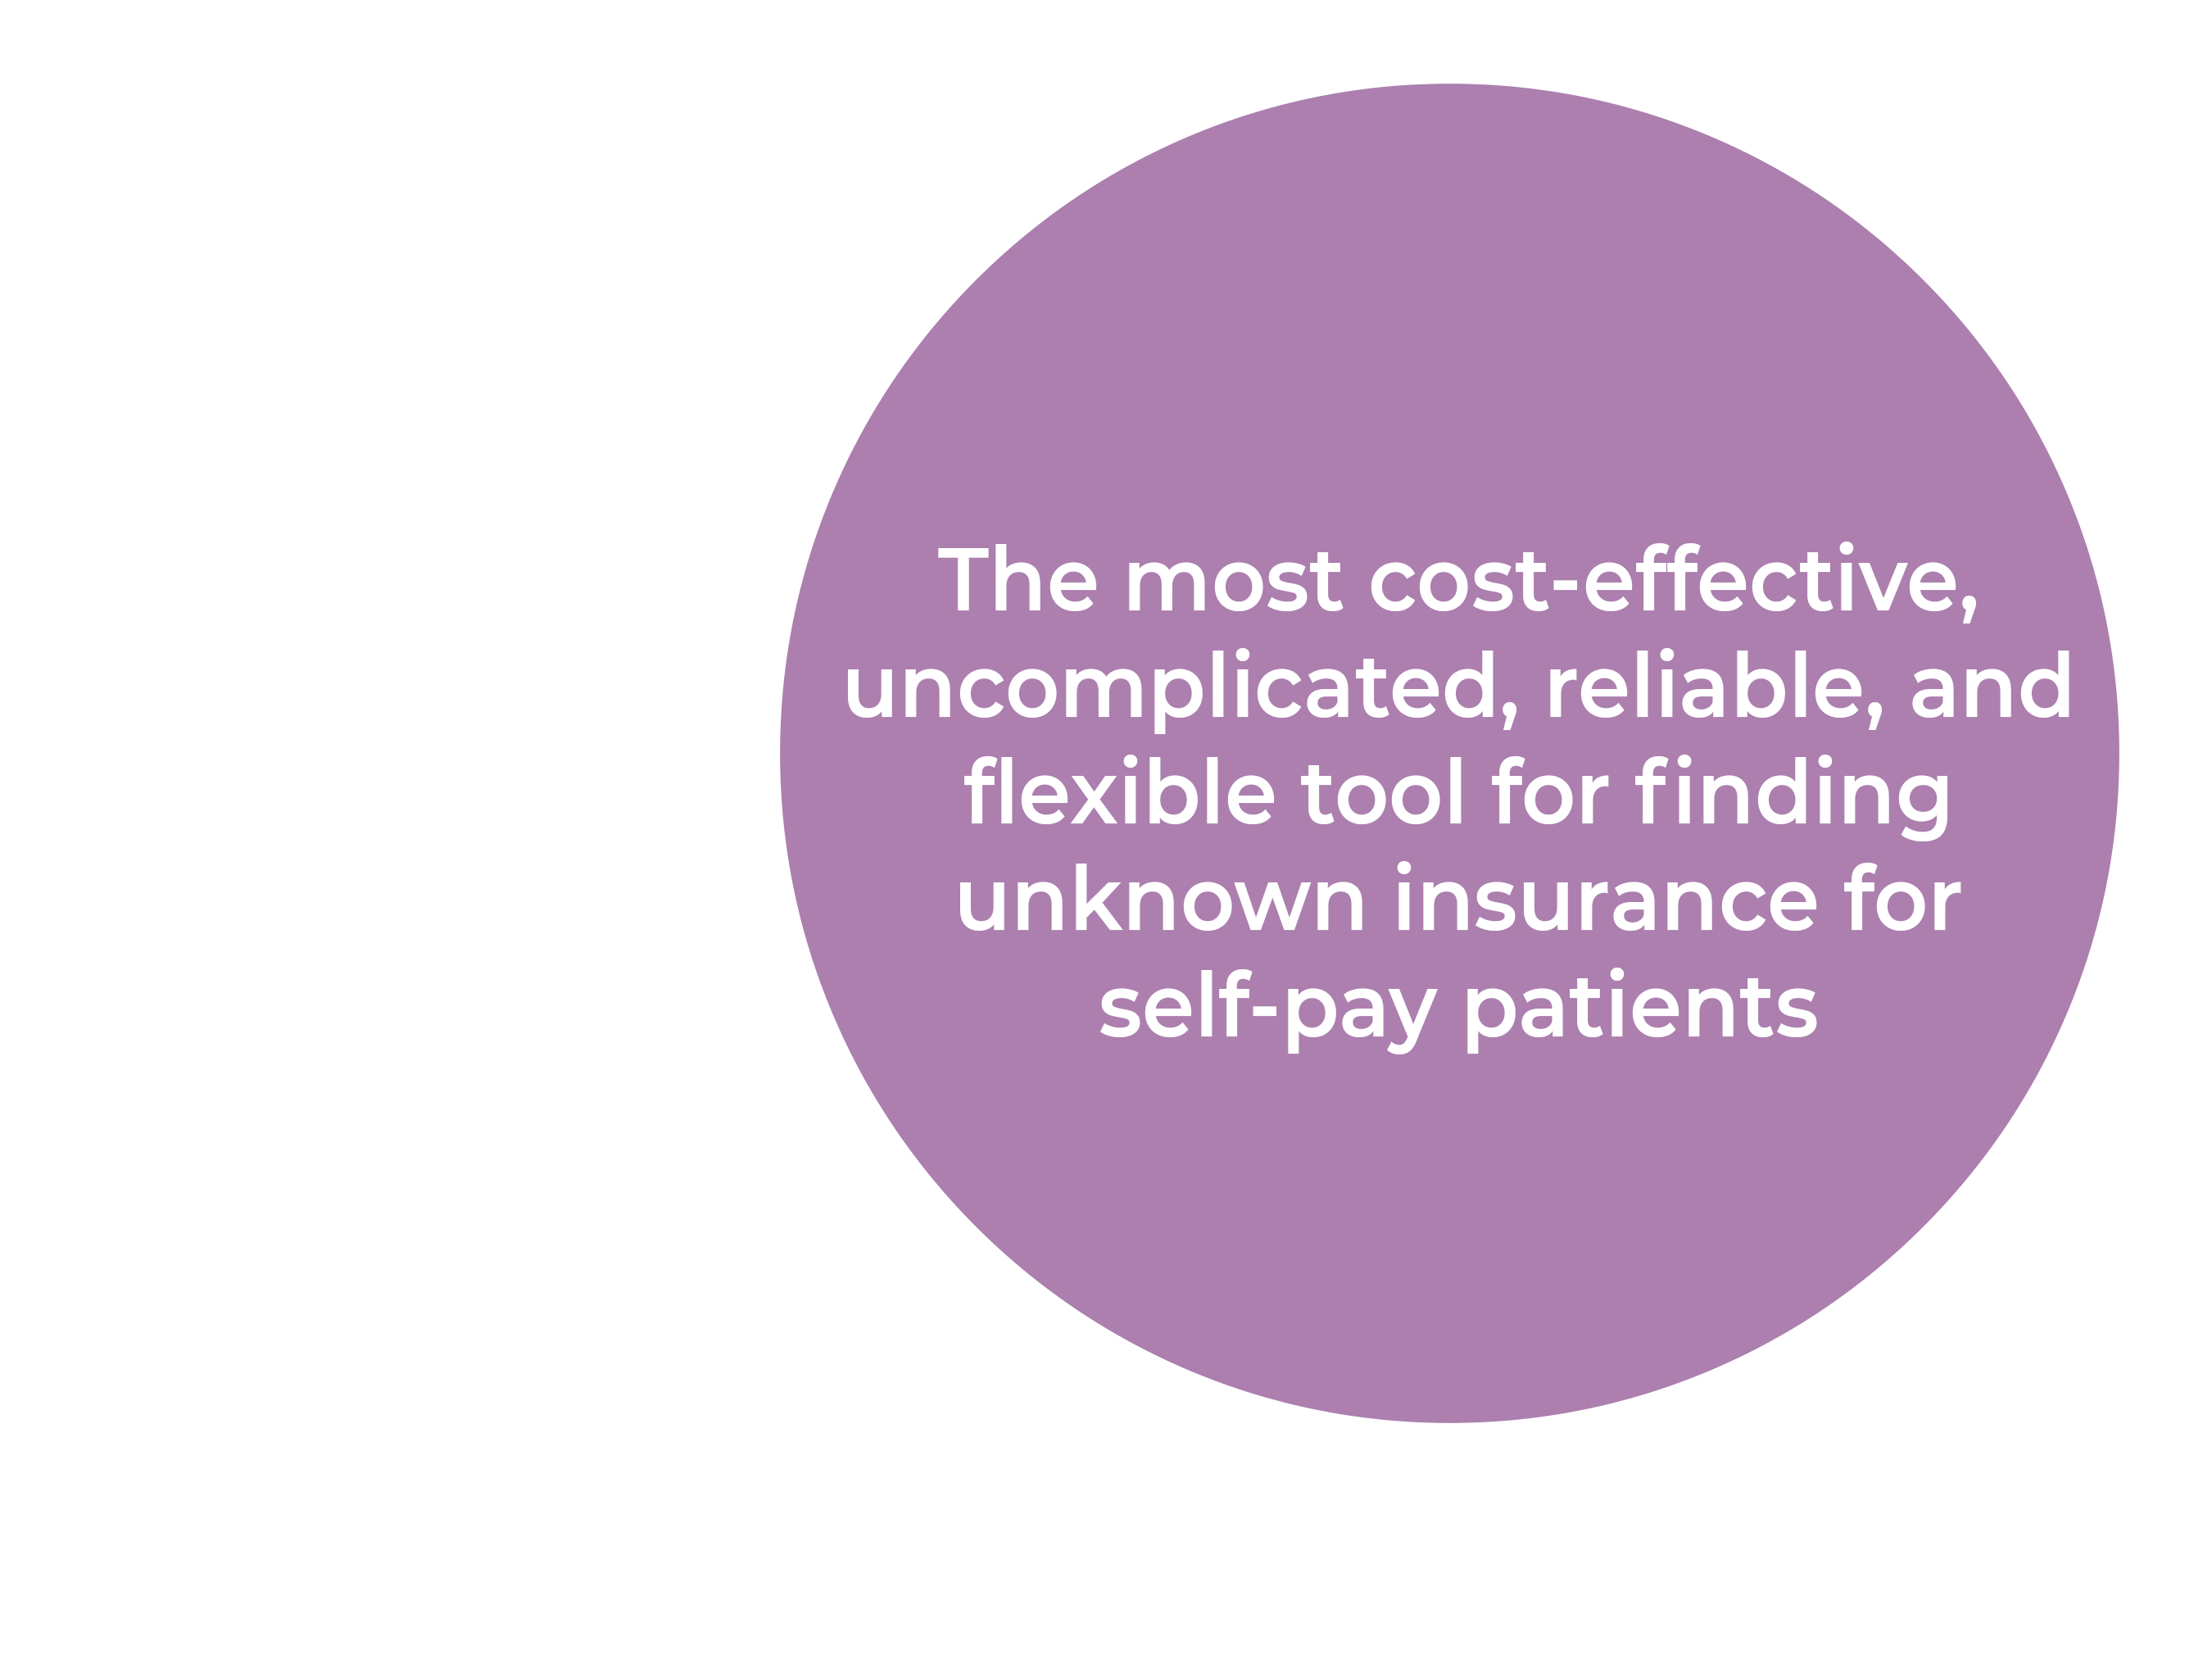  Image with text: the most cost-effective, uncomplicated, reliable, and flexible tool for finding unknown insurance for self-pay patients.